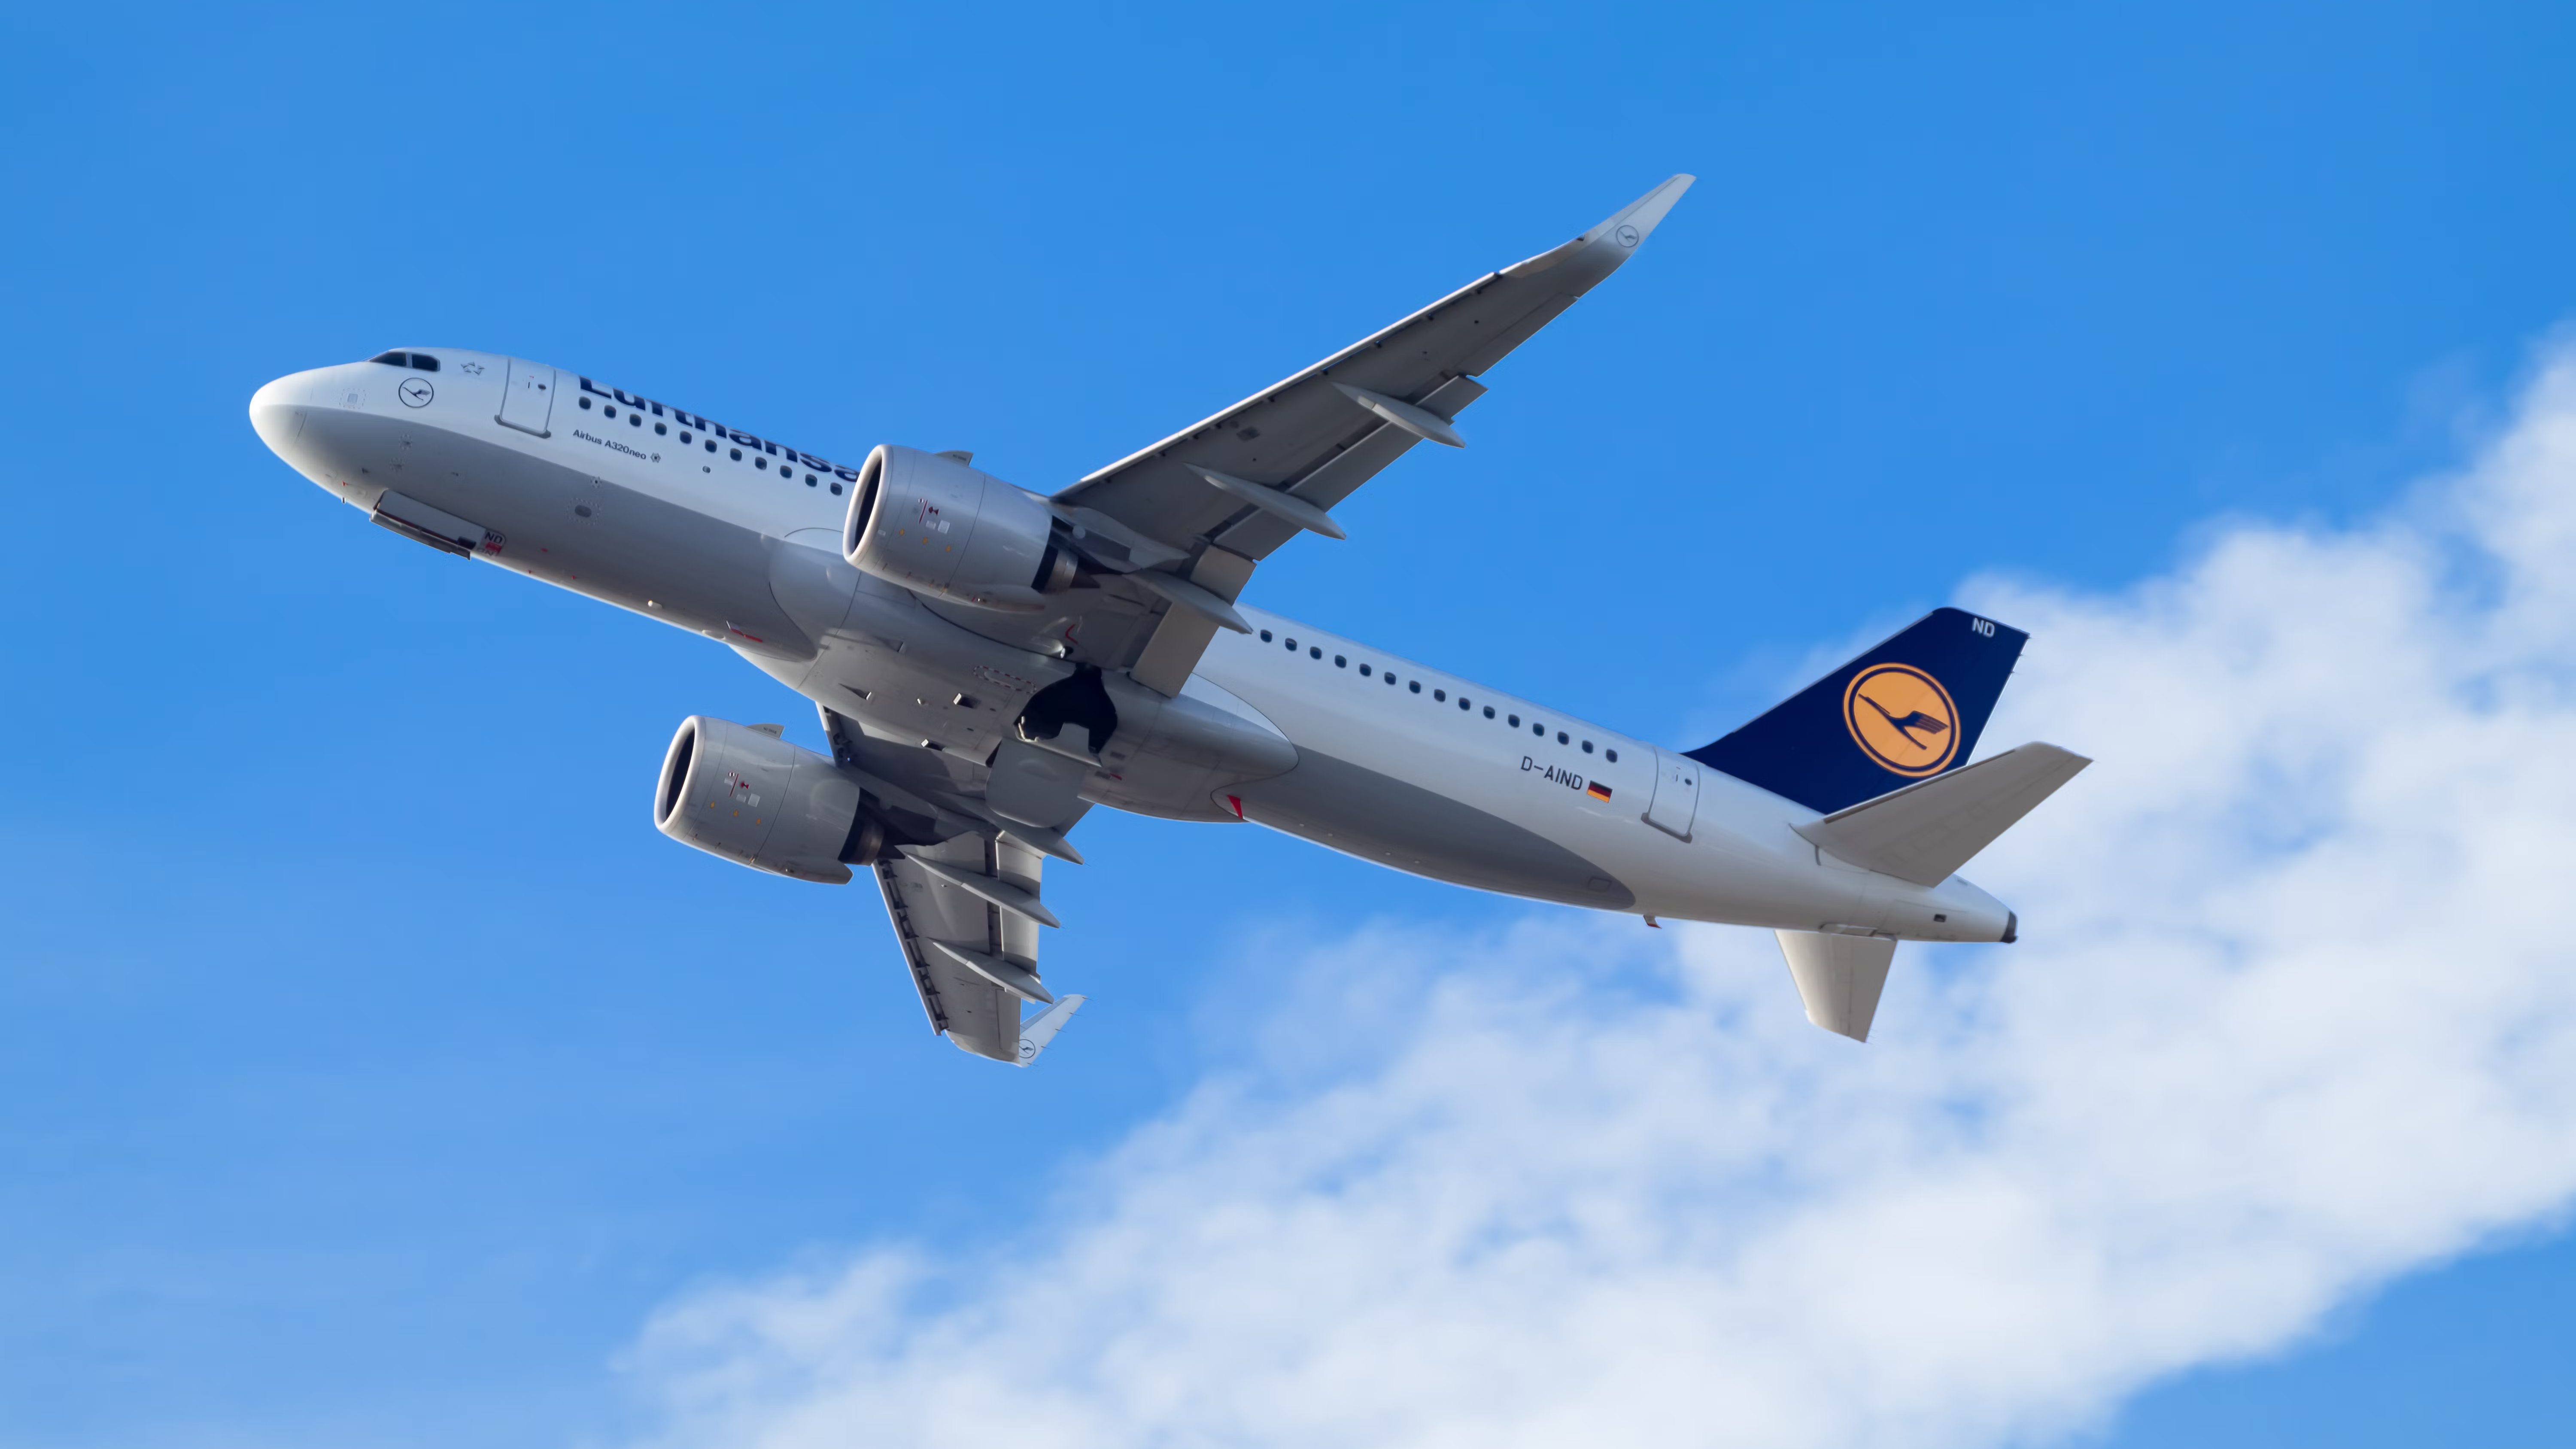 A Lufthansa Aircraft flying in the sky.